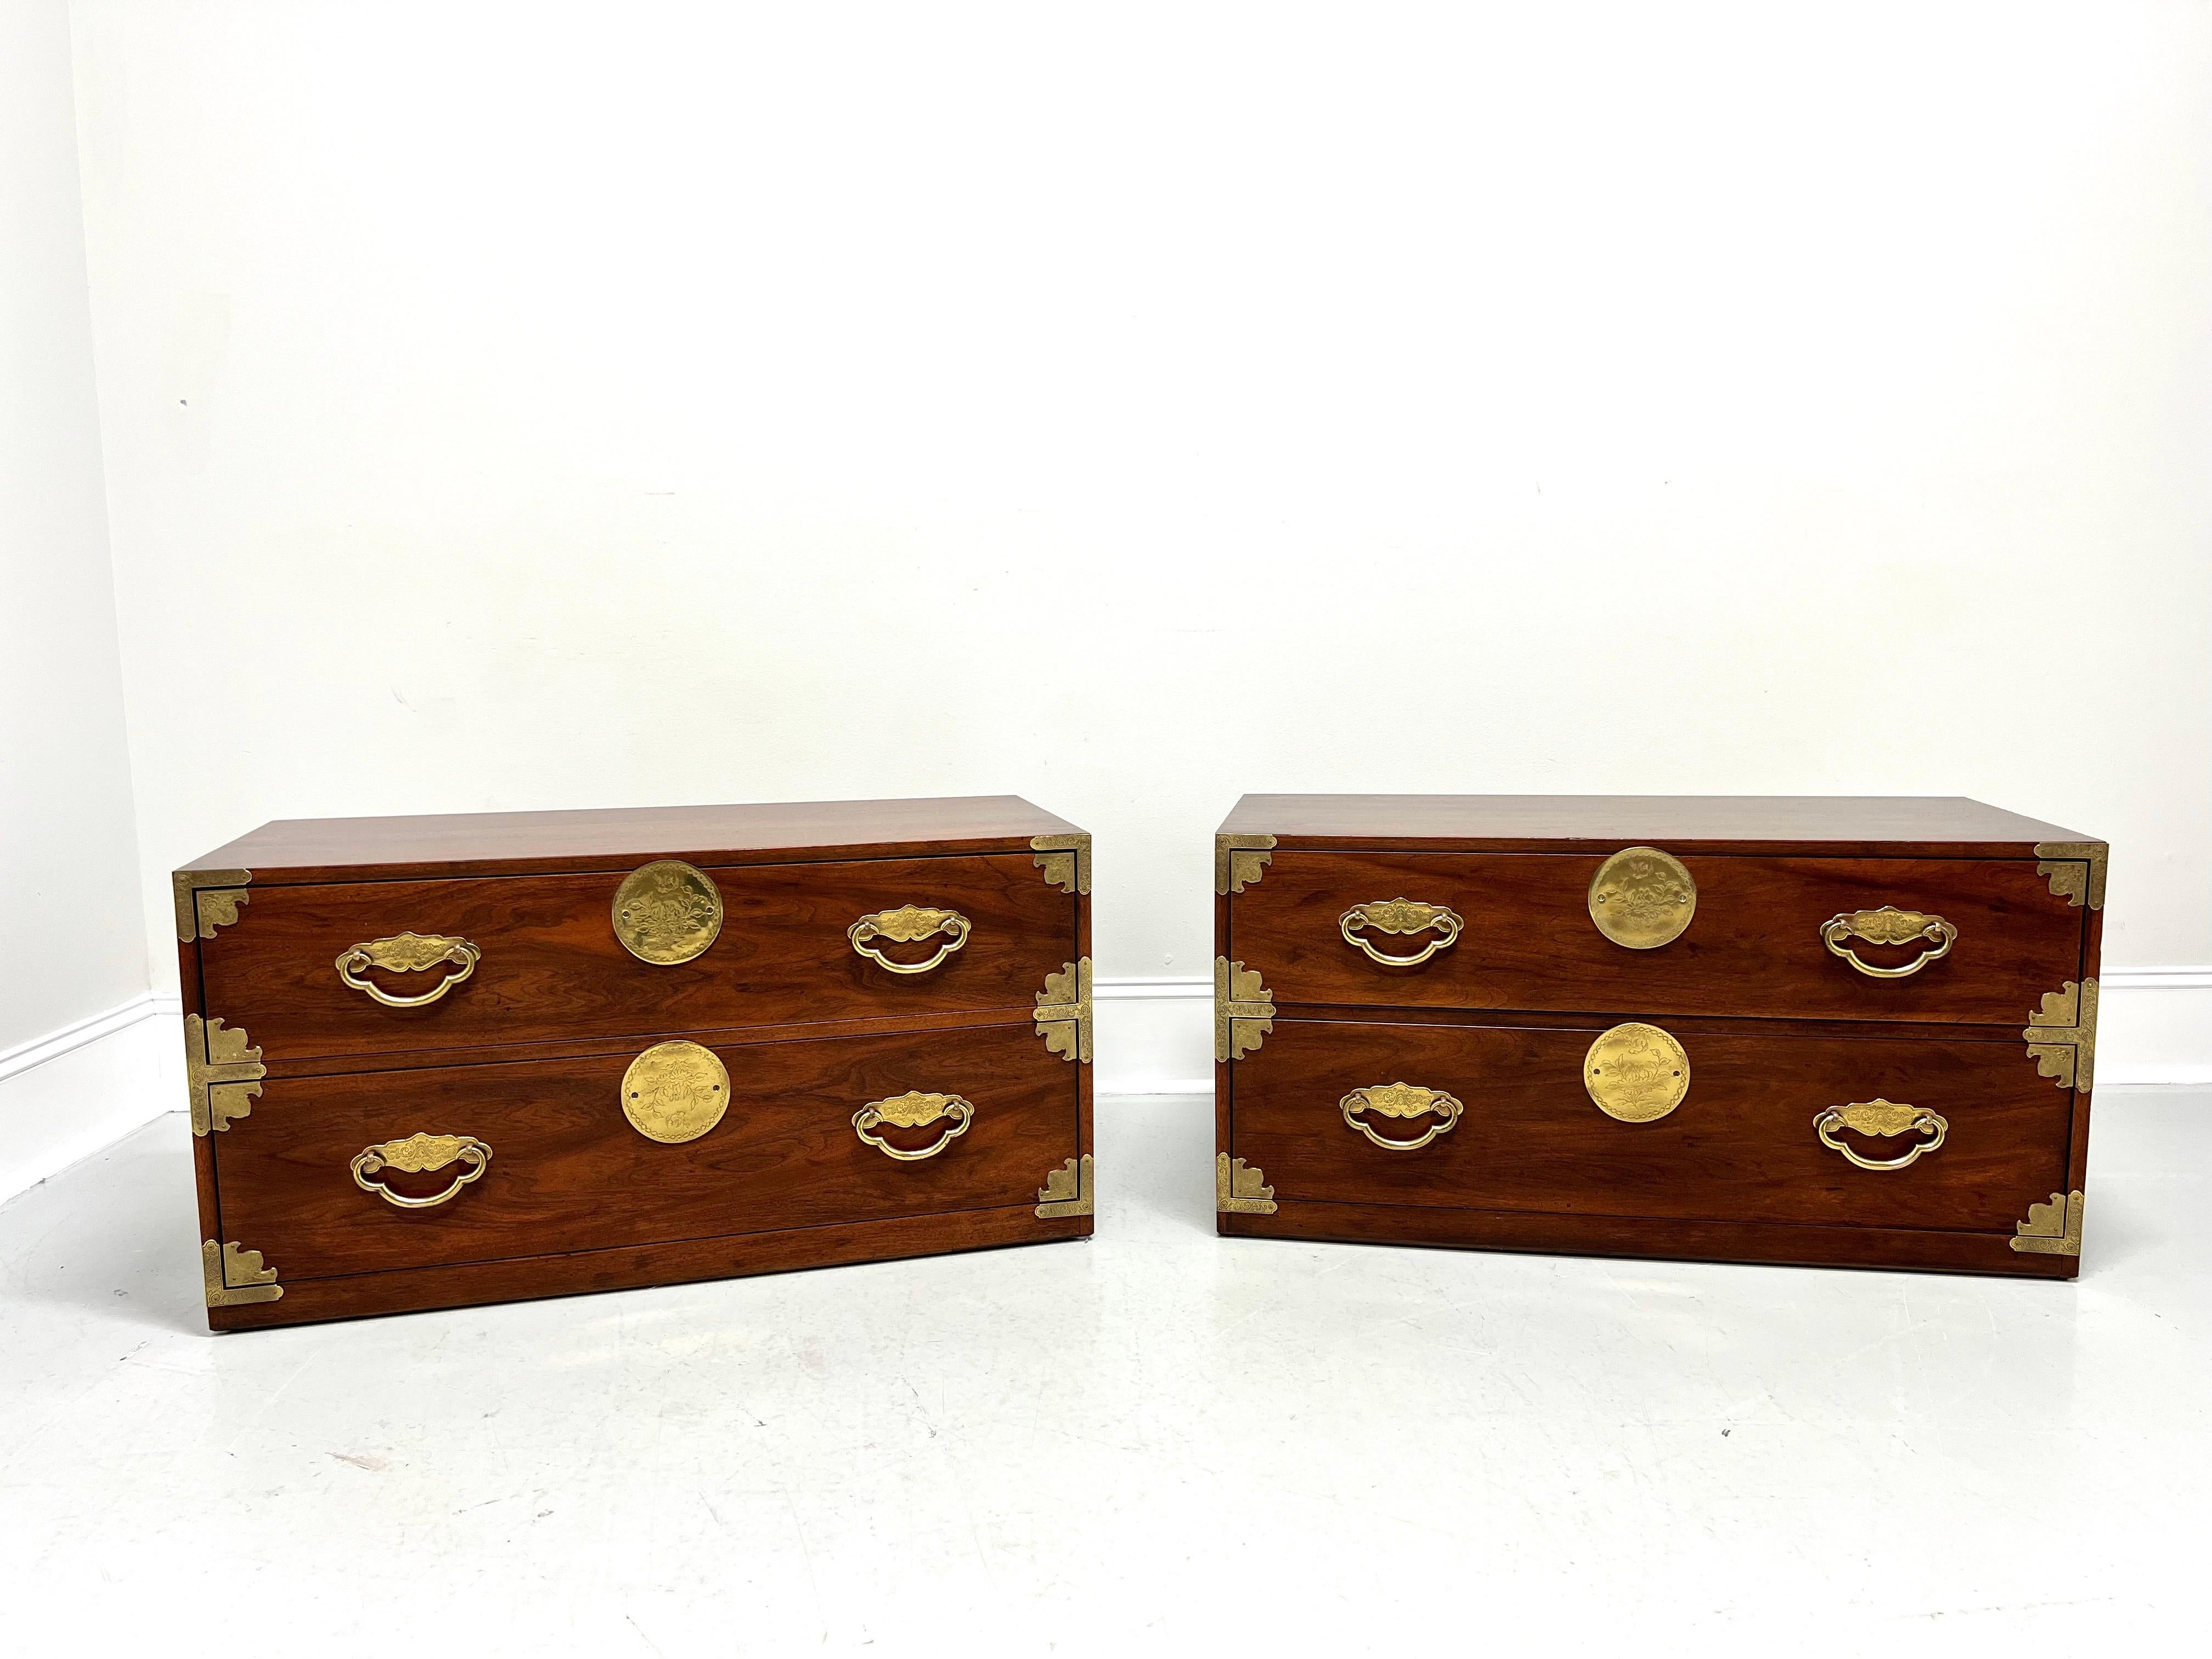 American HENREDON Asian Japanese Tansu Campaign Style Modular Stackable Chests - Pair B For Sale